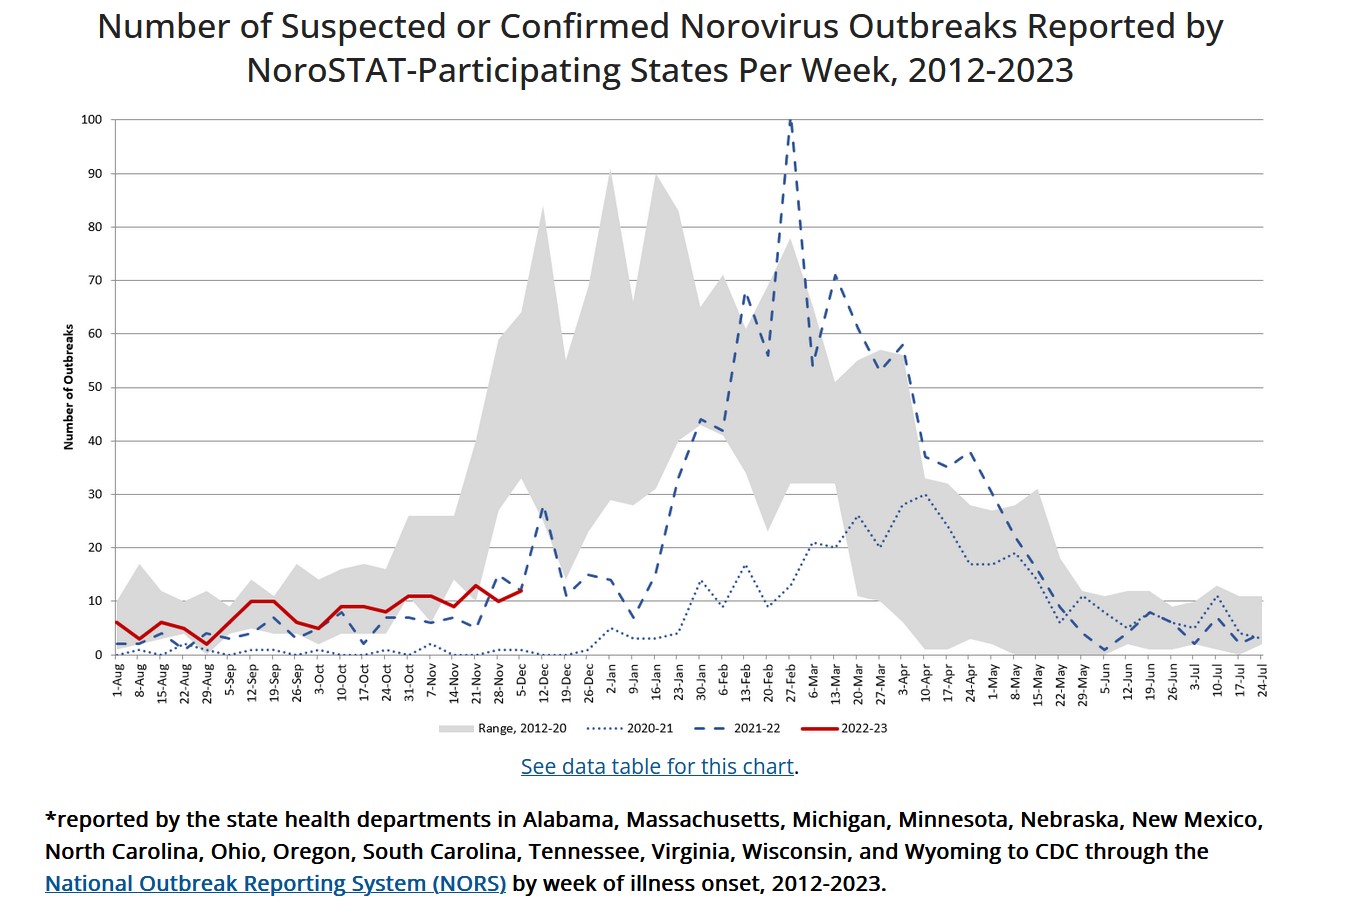 Number of Suspected or Confirmed Norovirus Outbreaks Reported by NoroSTAT-Participating States Per Week, 2012-2023